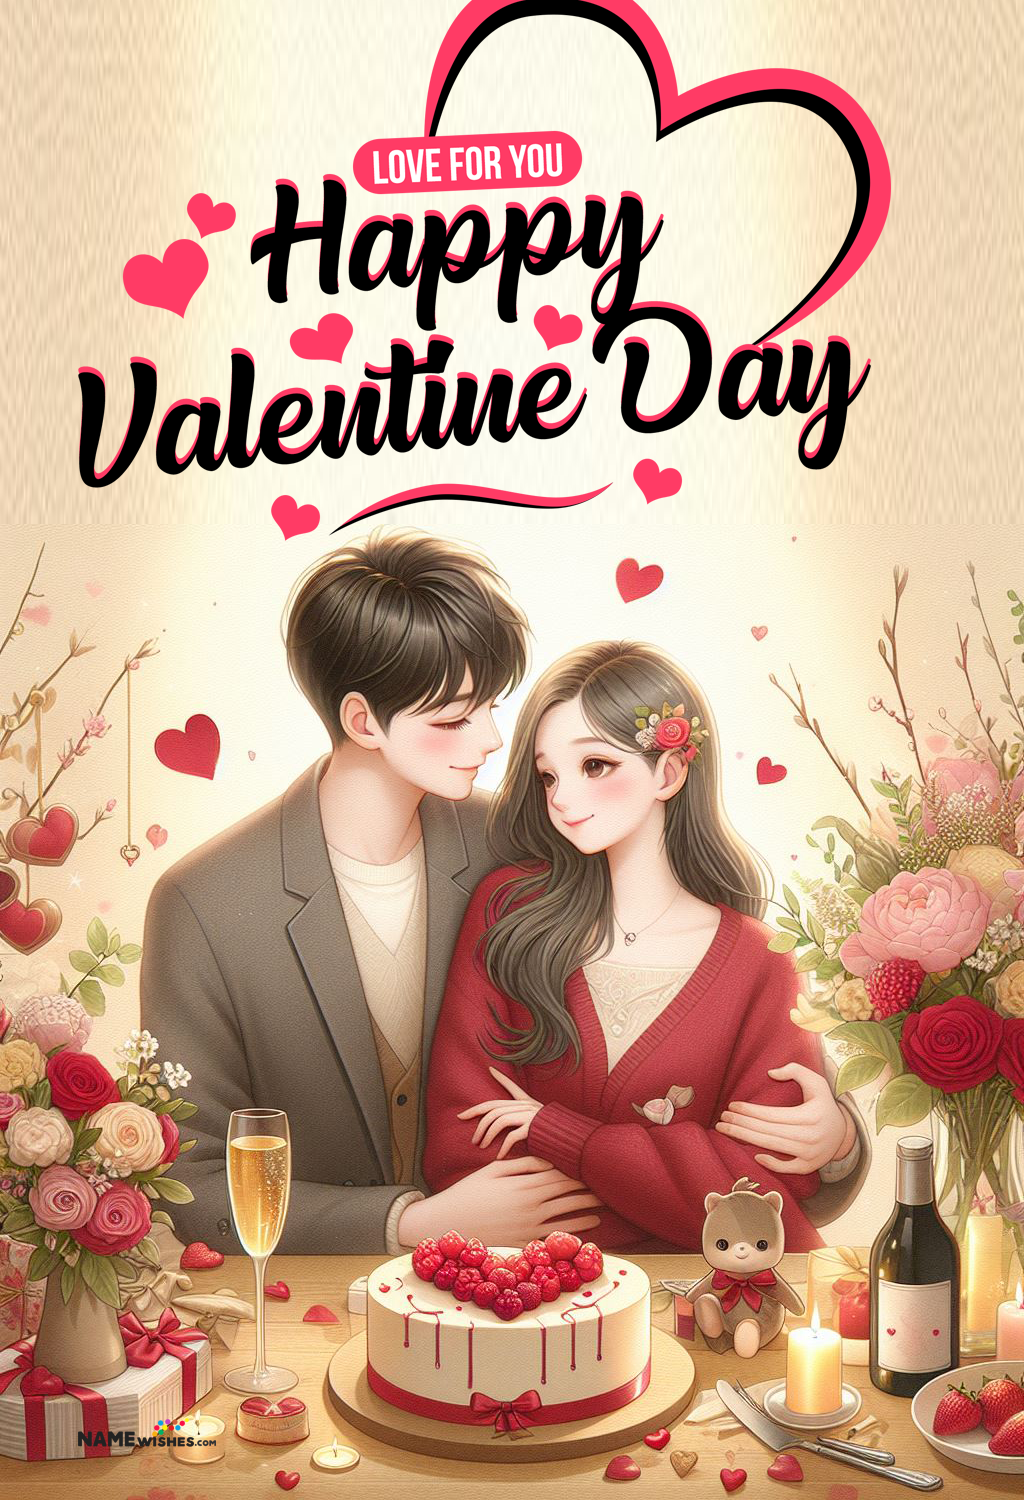 Heartfelt and Unique Valentine’s Day Wishes for Your Beloved Wife